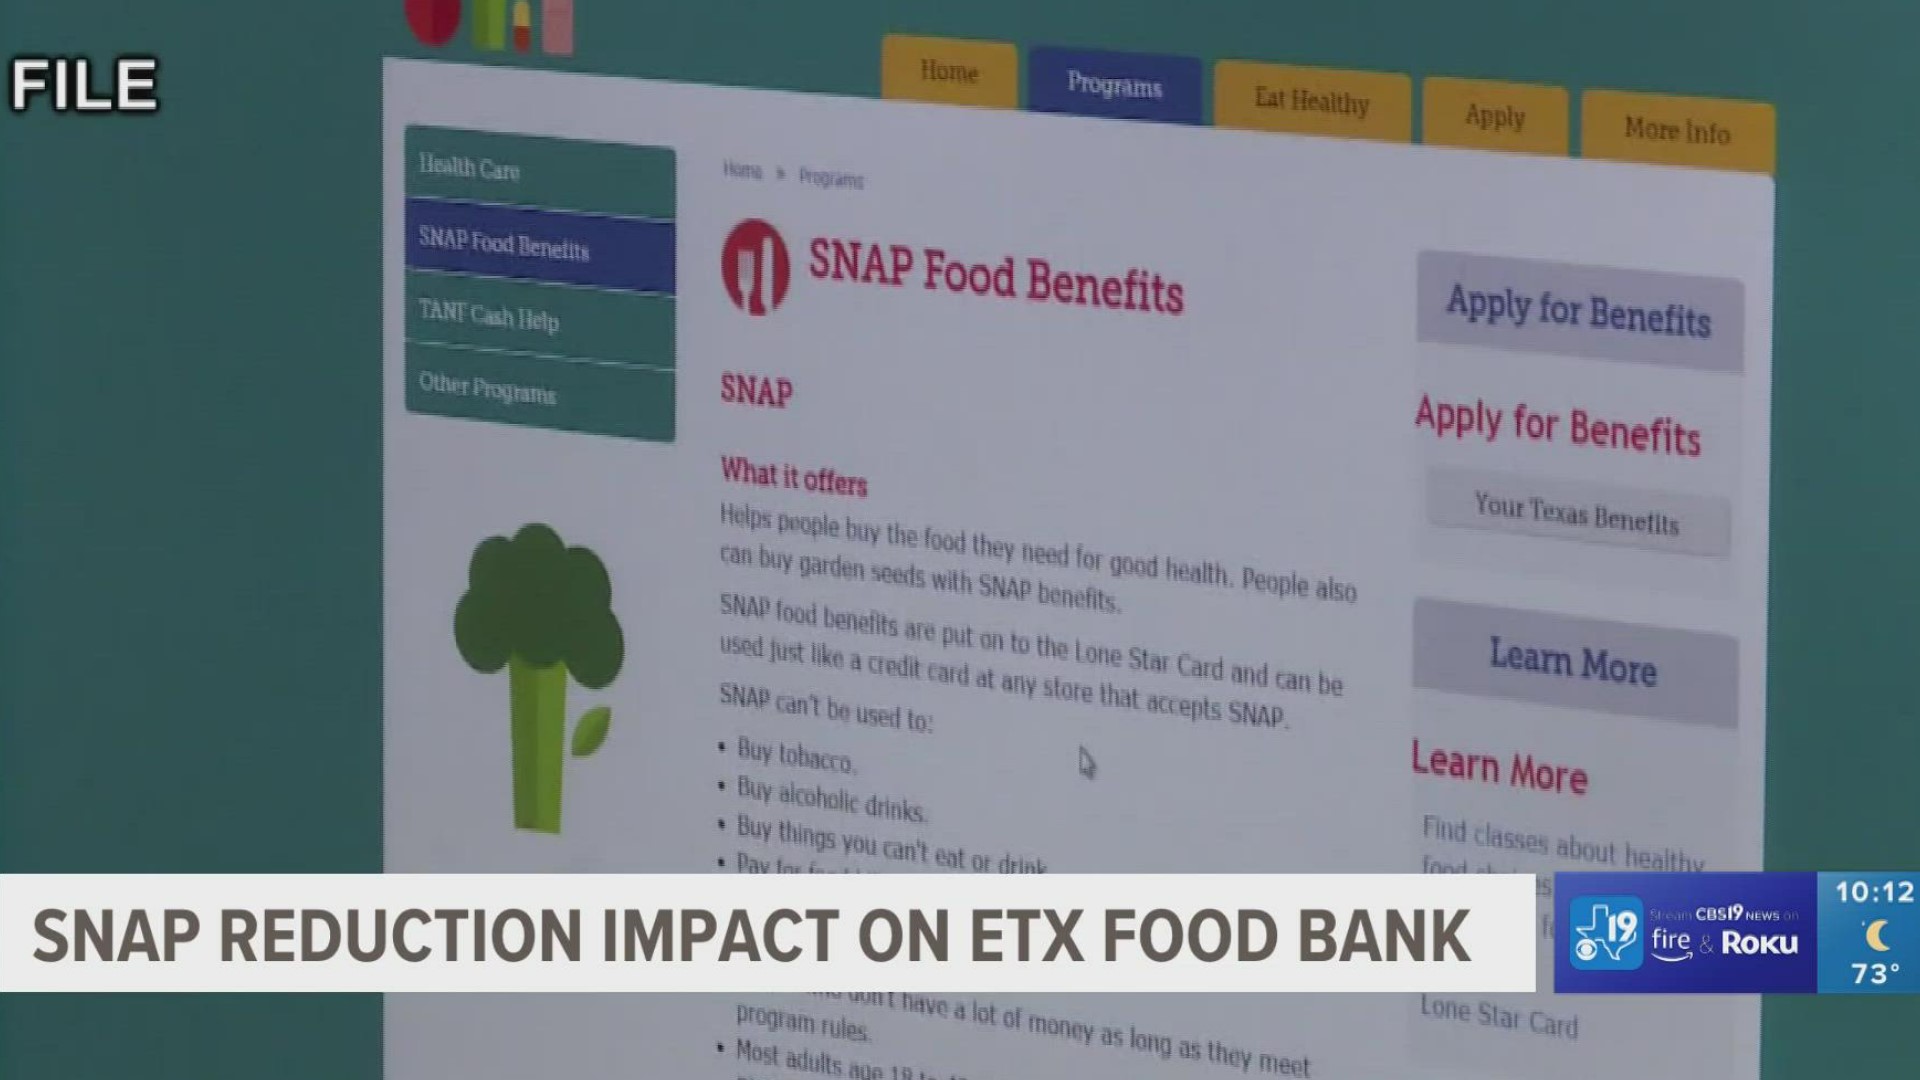 East Texas Food Bank CEO Dennis Cullinant said the reduction of SNAP benefits will see longer lines and it will cause more strain on their partner pantries.